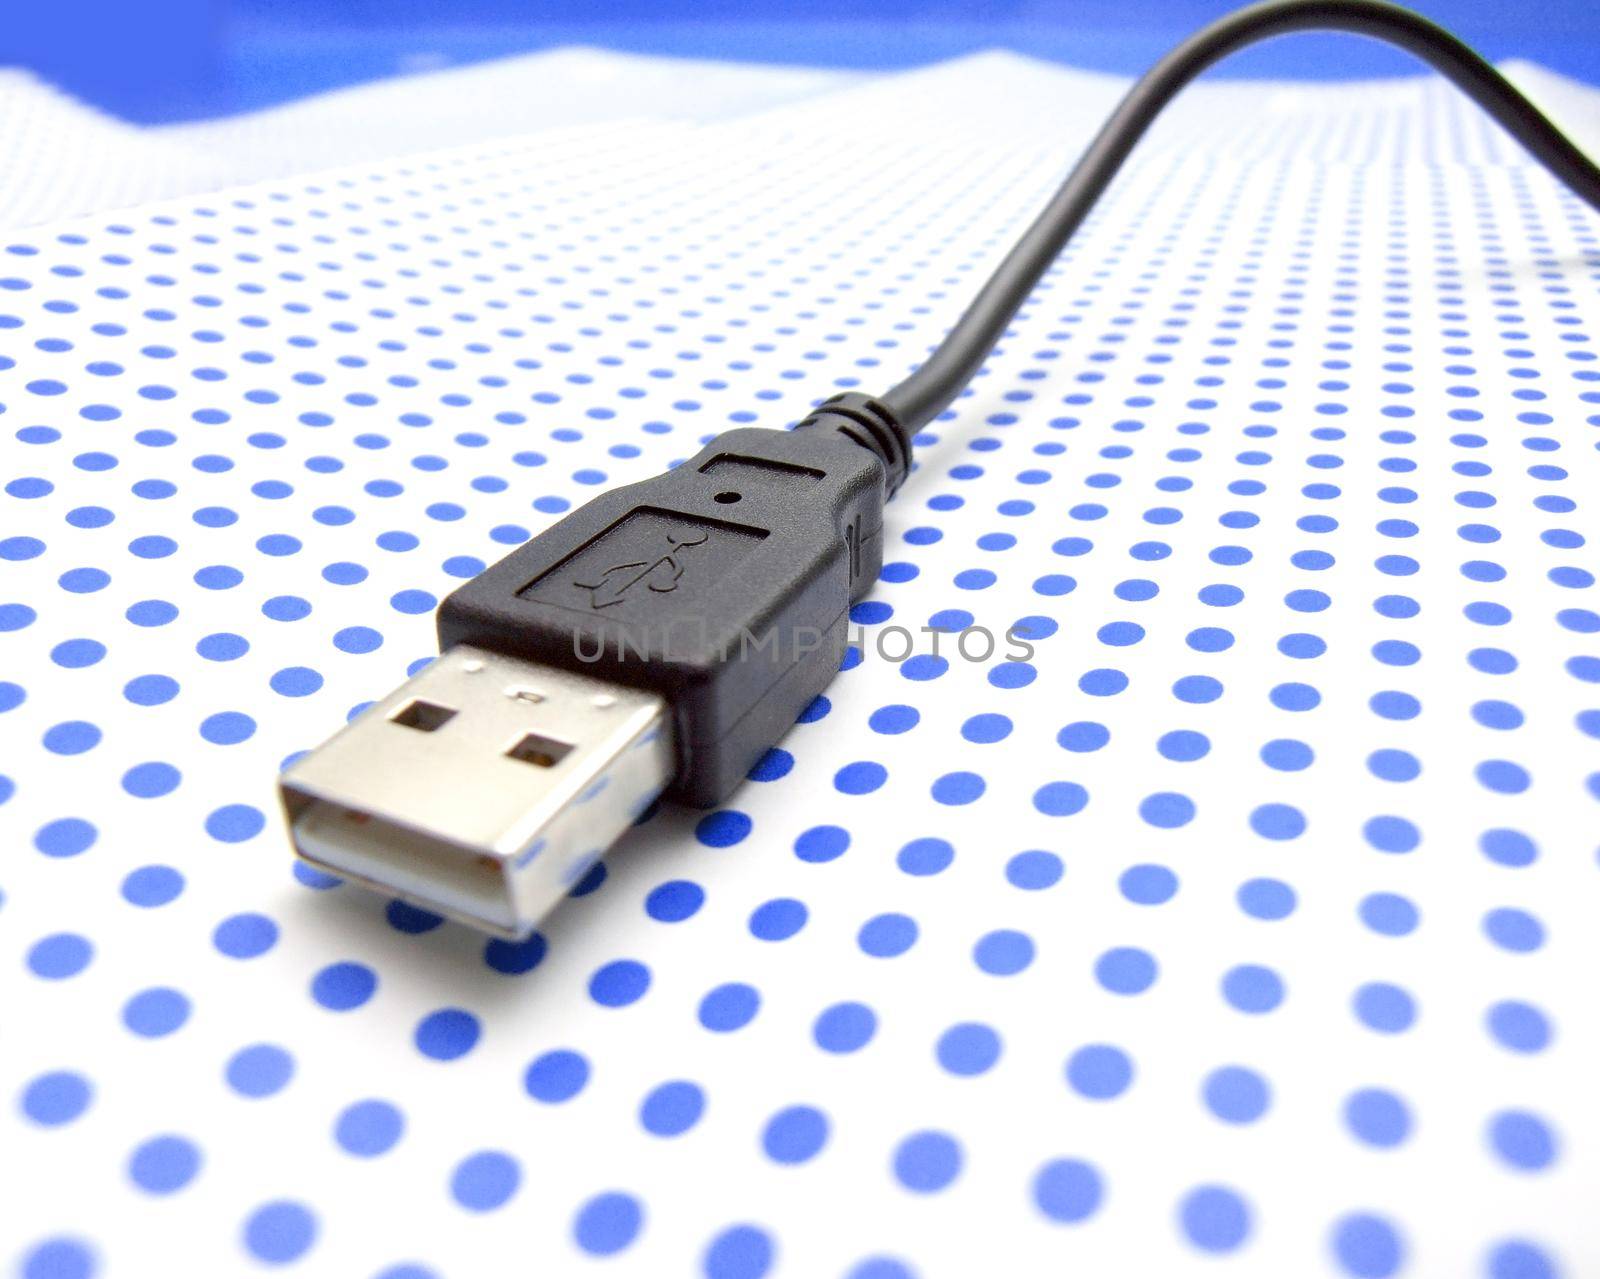 usb cable on dotted background by dotshock